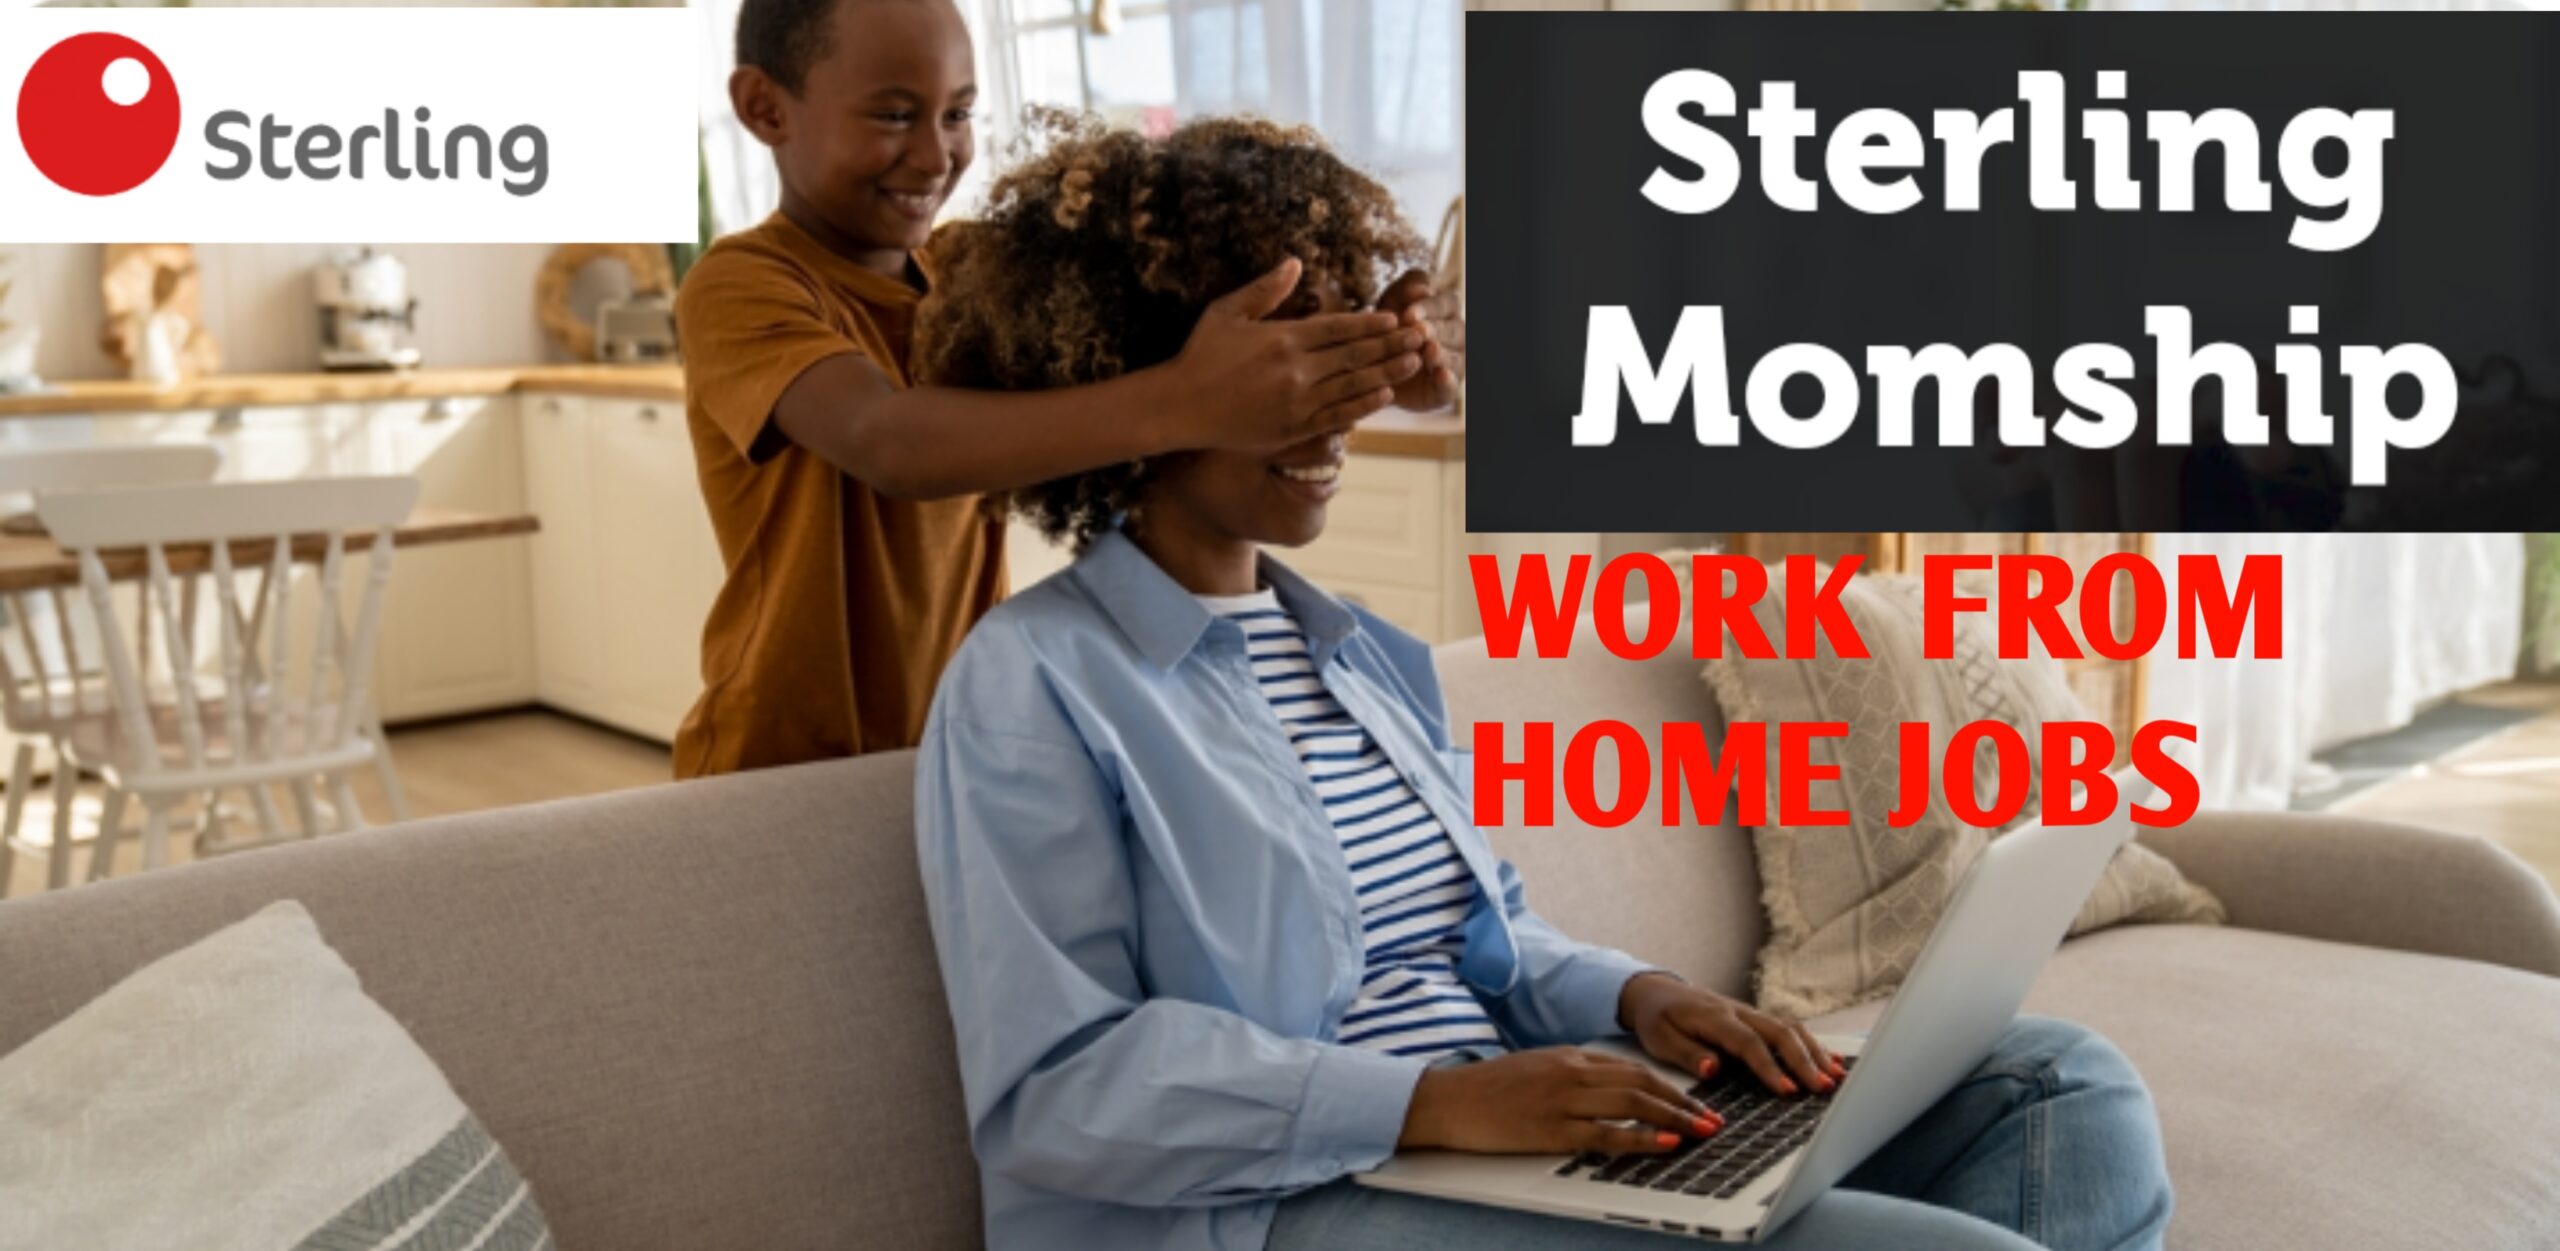 Work From Home Sterling Momship Jobs